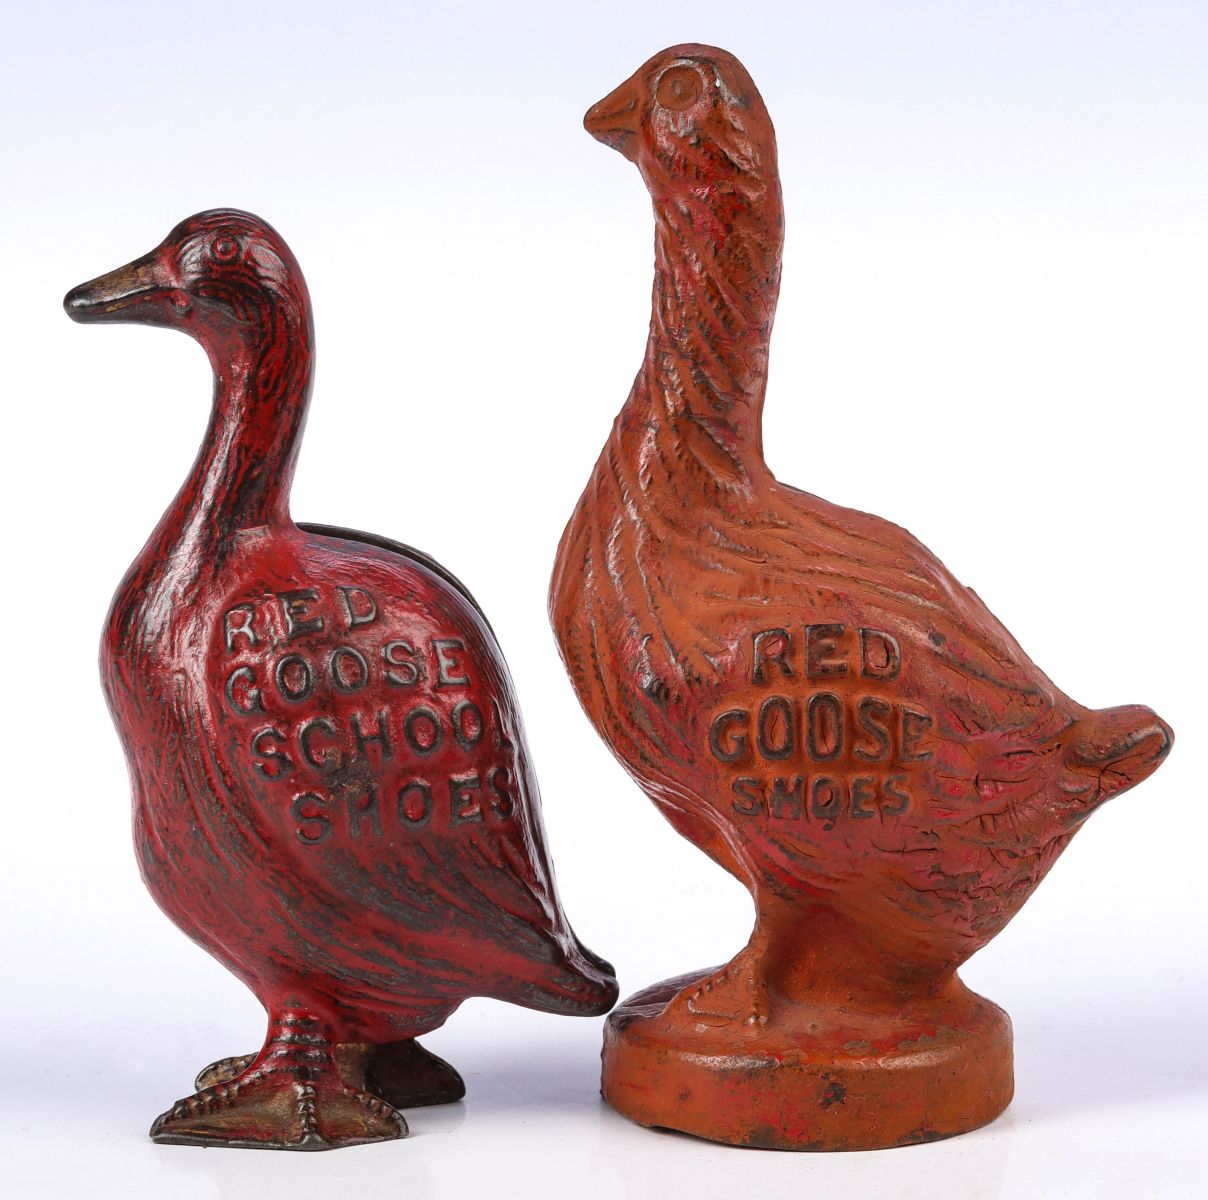 TWO RED GOOSE SHOES CAST IRON BANKS